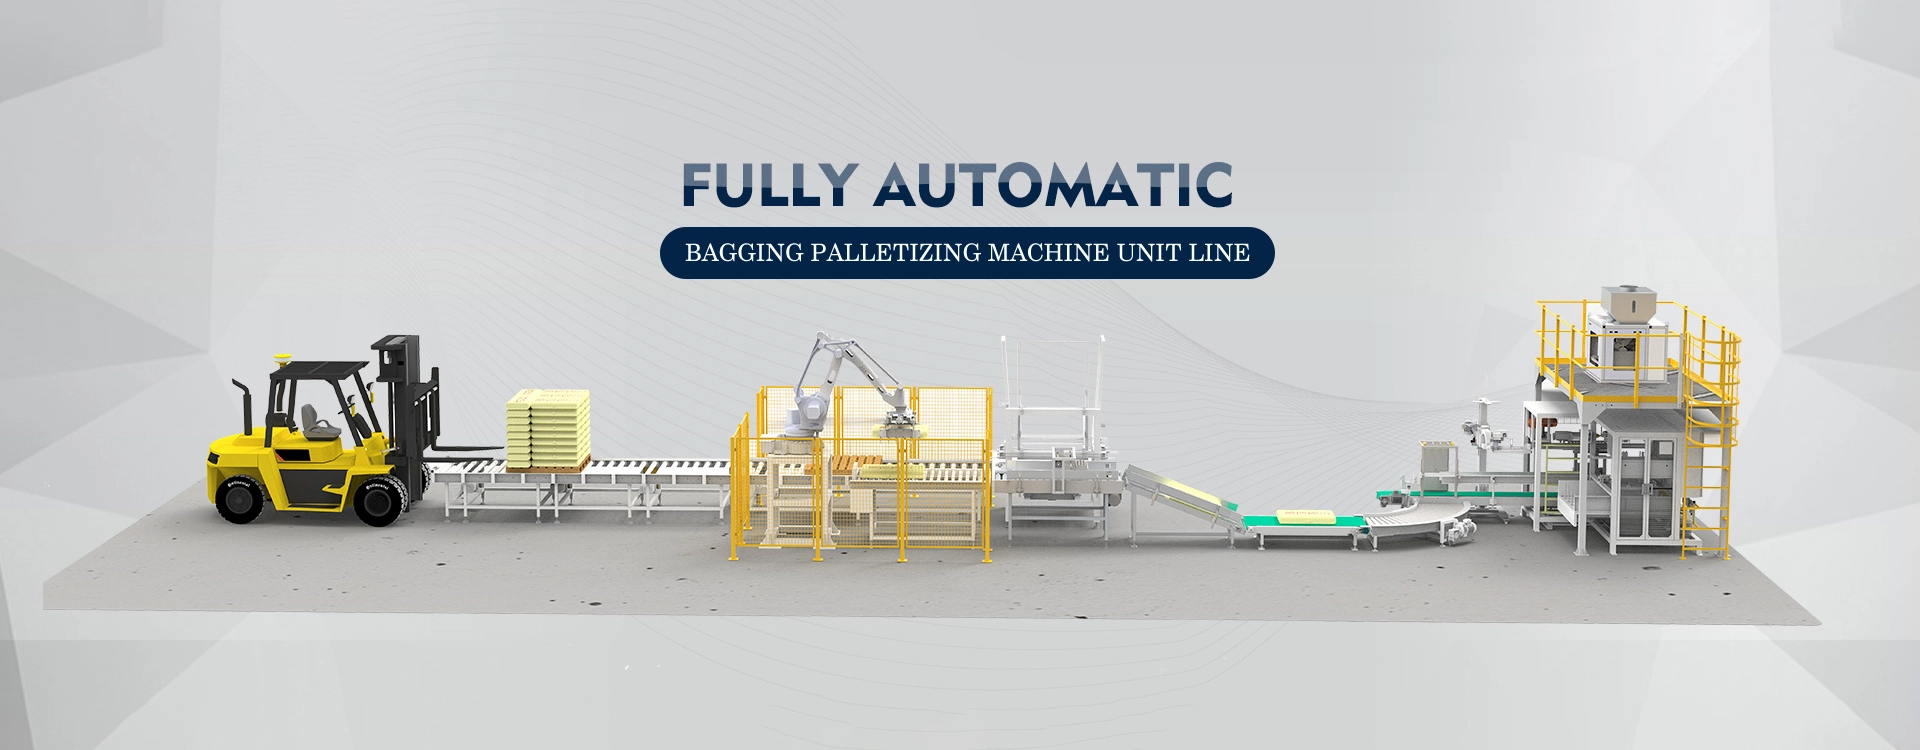 Industrial Bagging Solution | Manual & Automatic Bagging Palletizing Equipment Heading Banner Picture